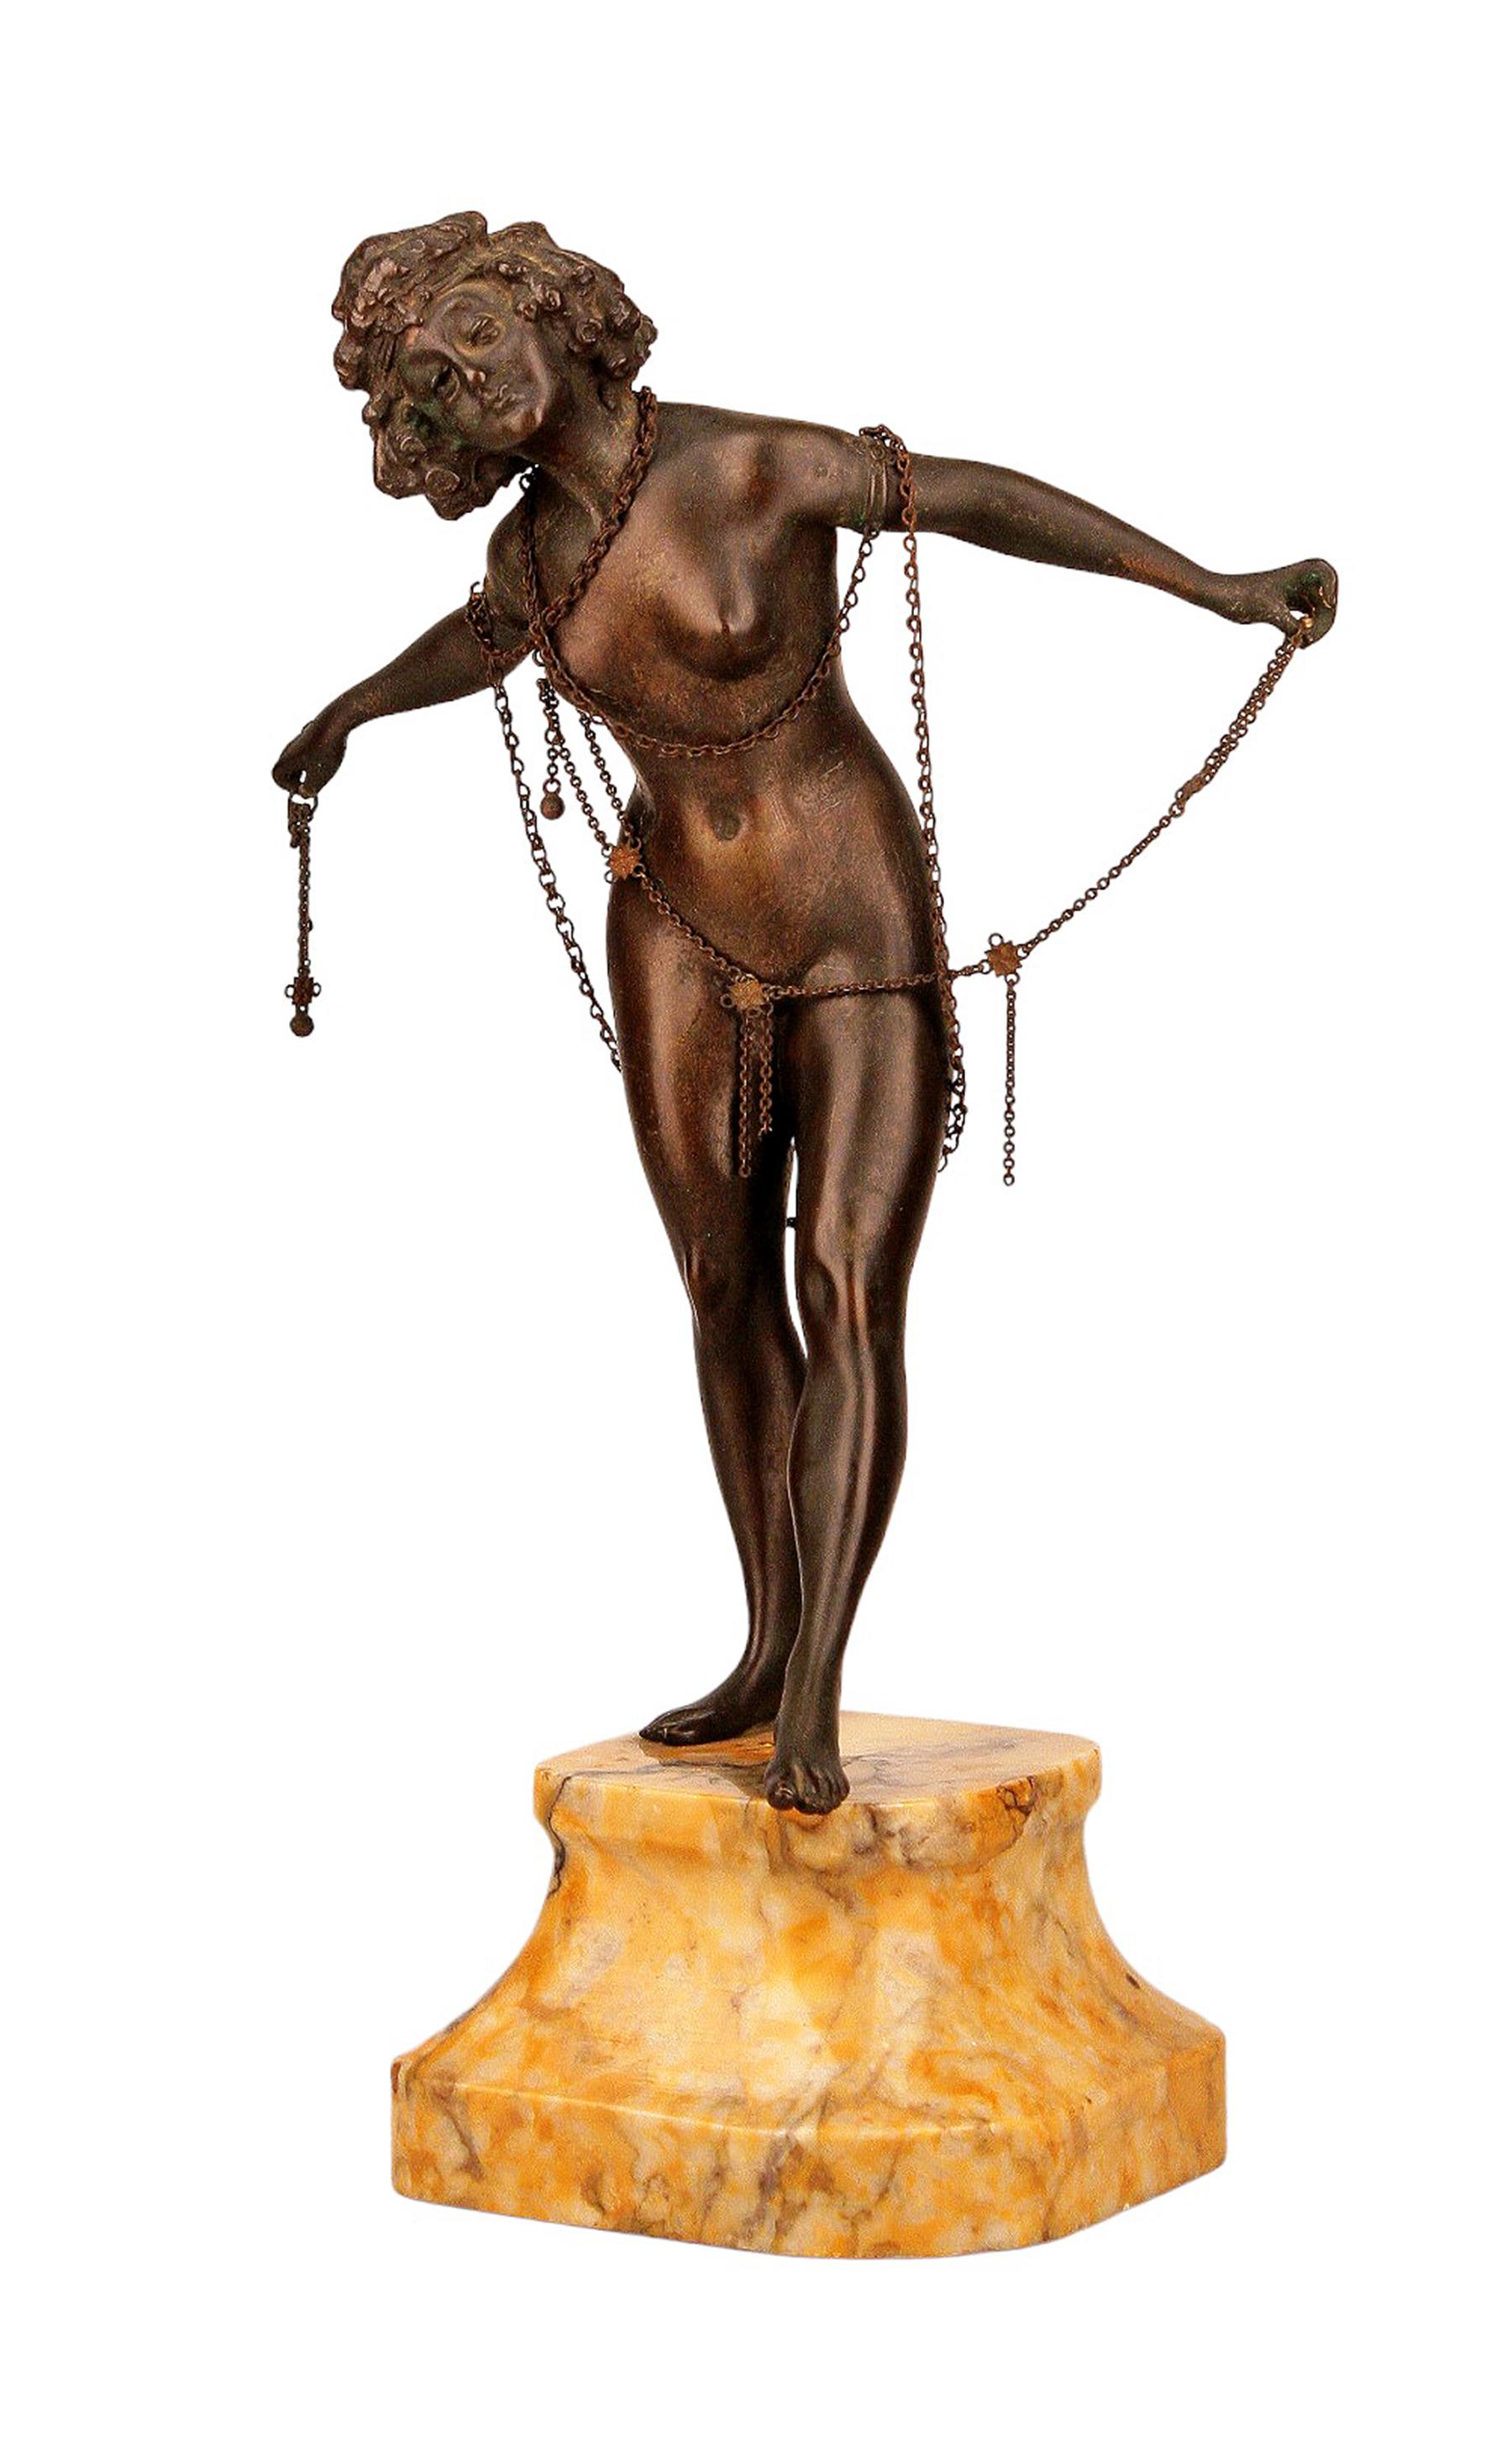 Art Déco french nude lady in chains bronze sculpture with stone base in the style of Demetre Chiparus

By: Demetre Chiparus (in the style of)
Material: bronze, copper, metal, stone
Technique: cast, molded, polished, metalwork, patinated
Dimensions: